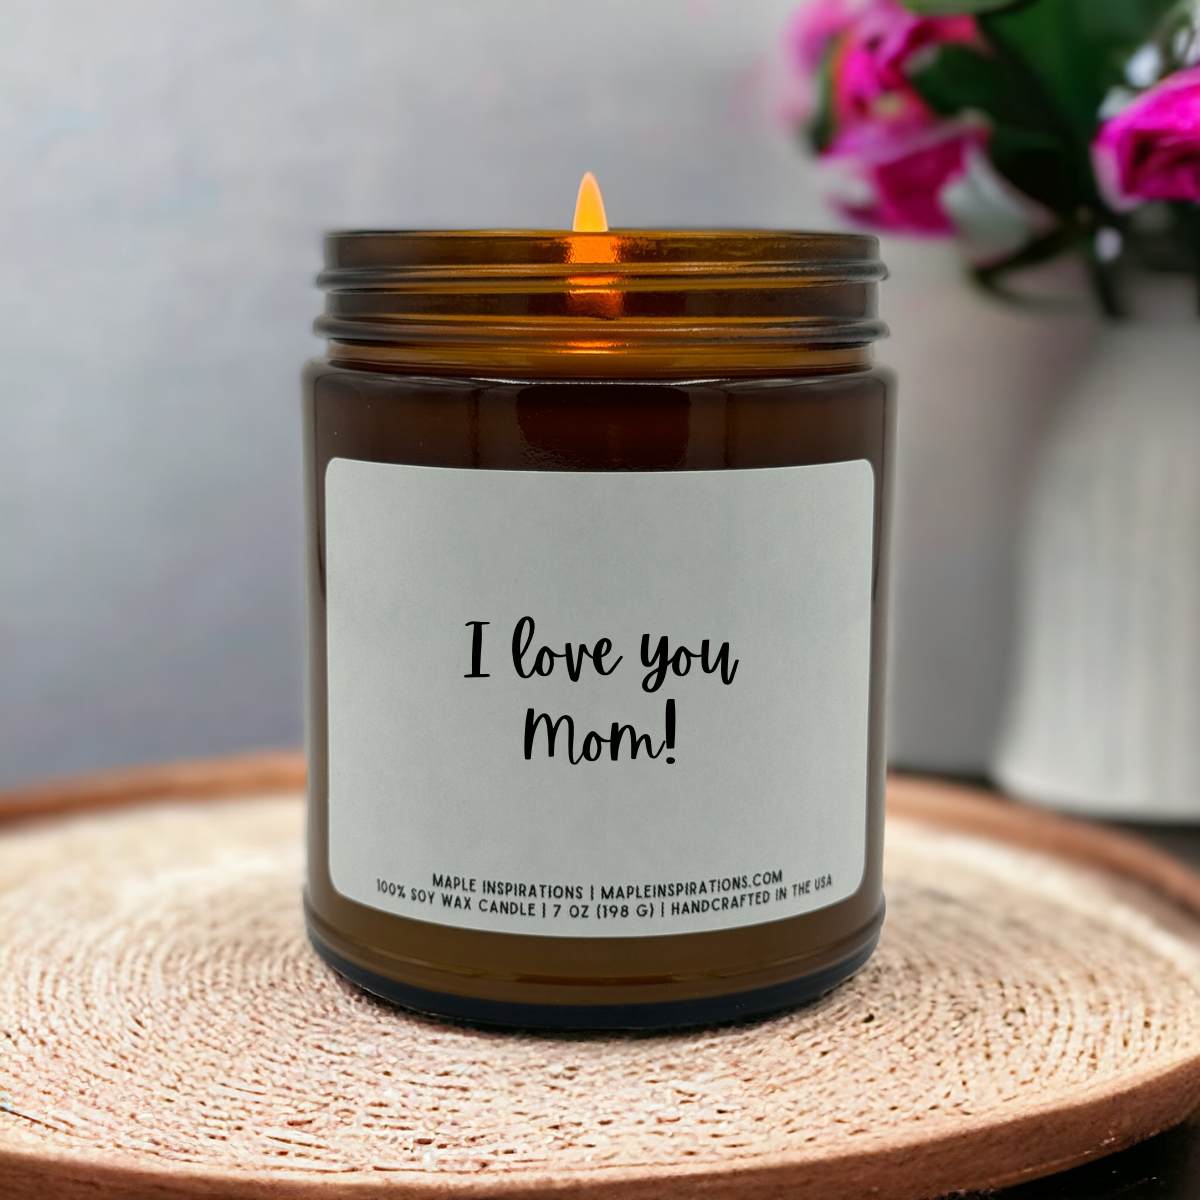 I love you Mom Candle for Mom, Scented Soy Candle, Mother's Day Gift for Mom, Mom Candle, Gift for Mothers Day, Mothers Day Candle for Mom, Mom Birthday Gift From Daughter / Son